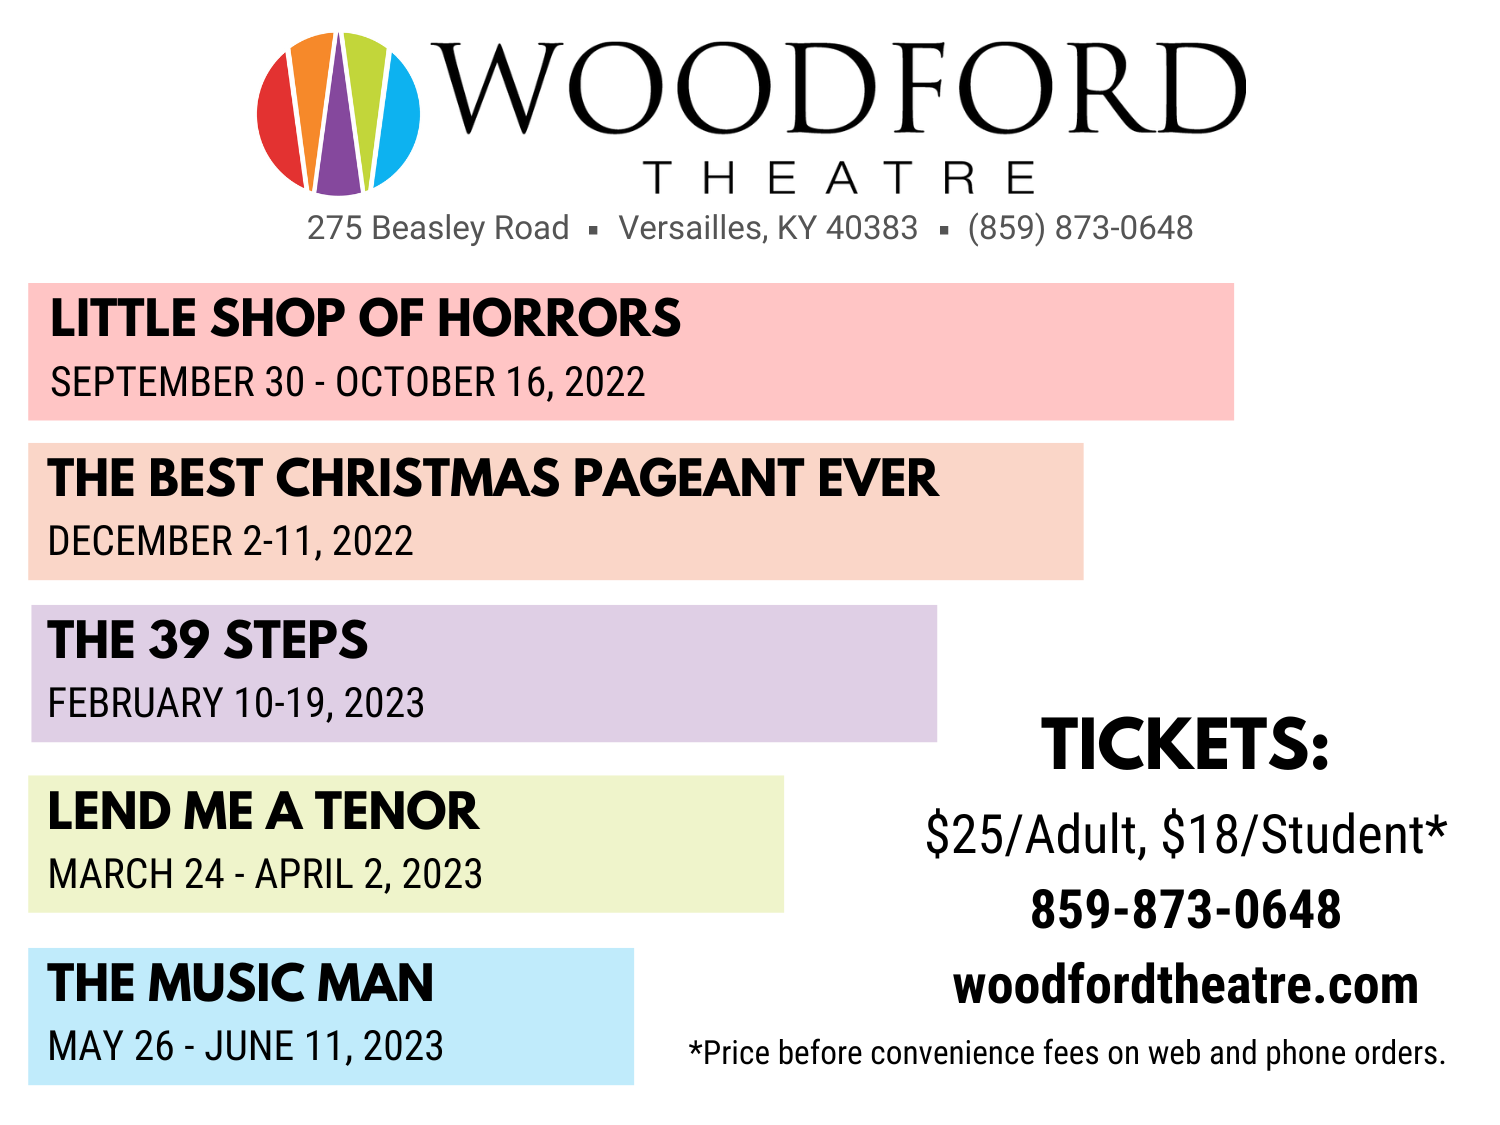 Woodford Theatre